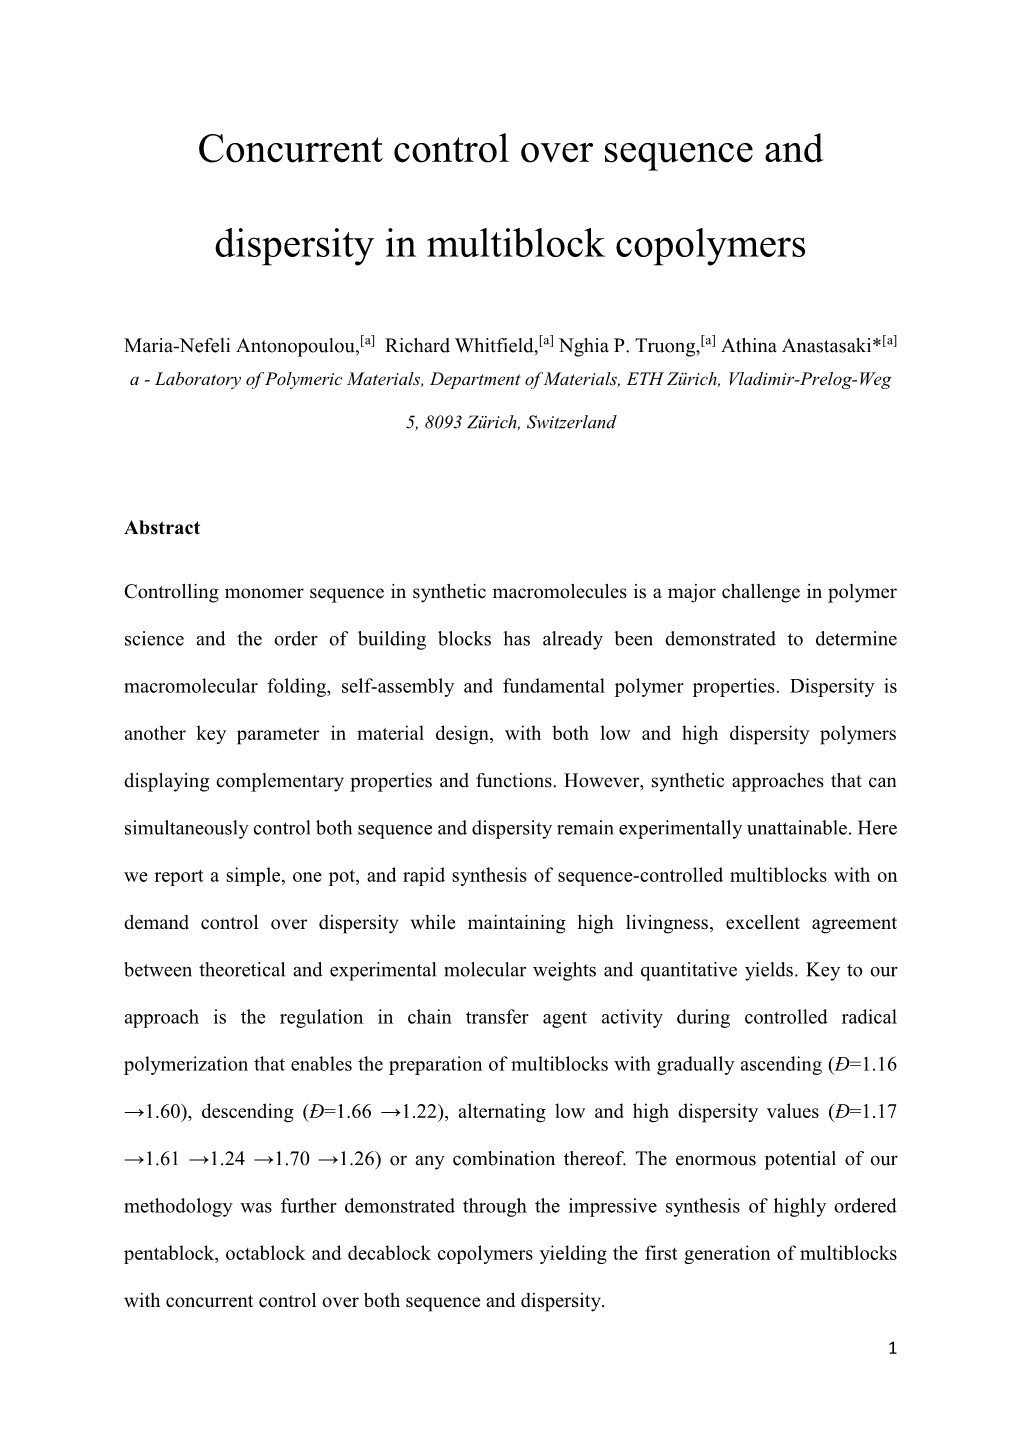 Concurrent Control Over Sequence and Dispersity in Multiblock Copolymers